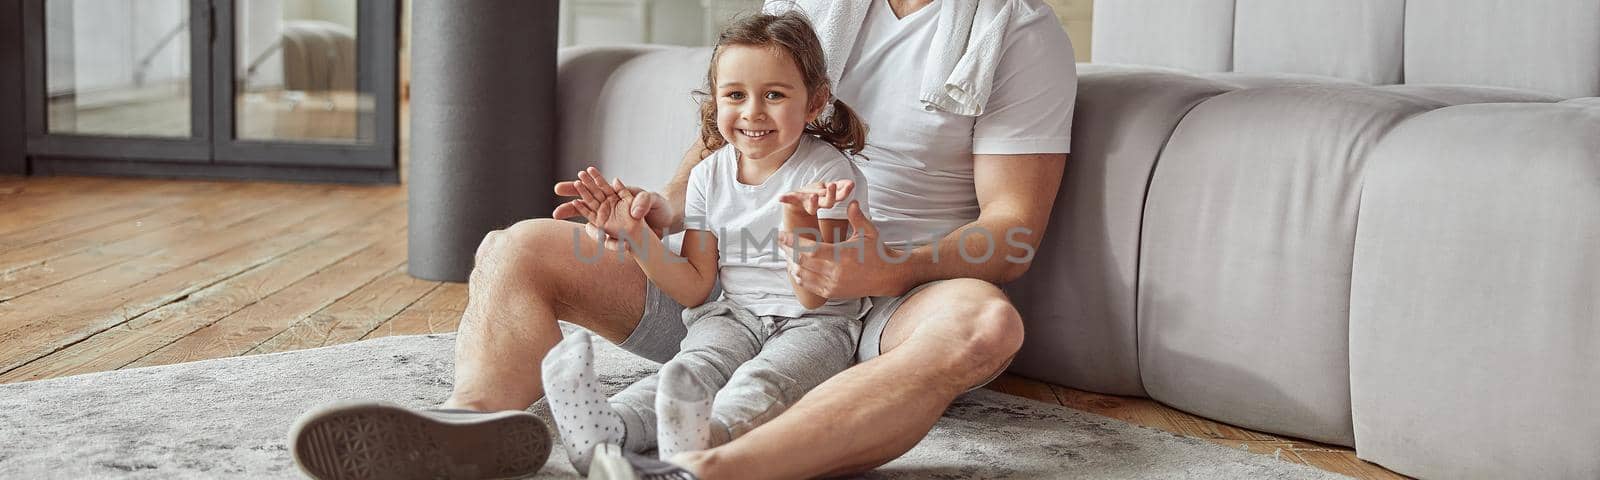 Full length portrait of joyful daughter sitting on floor with father while spending active day at home